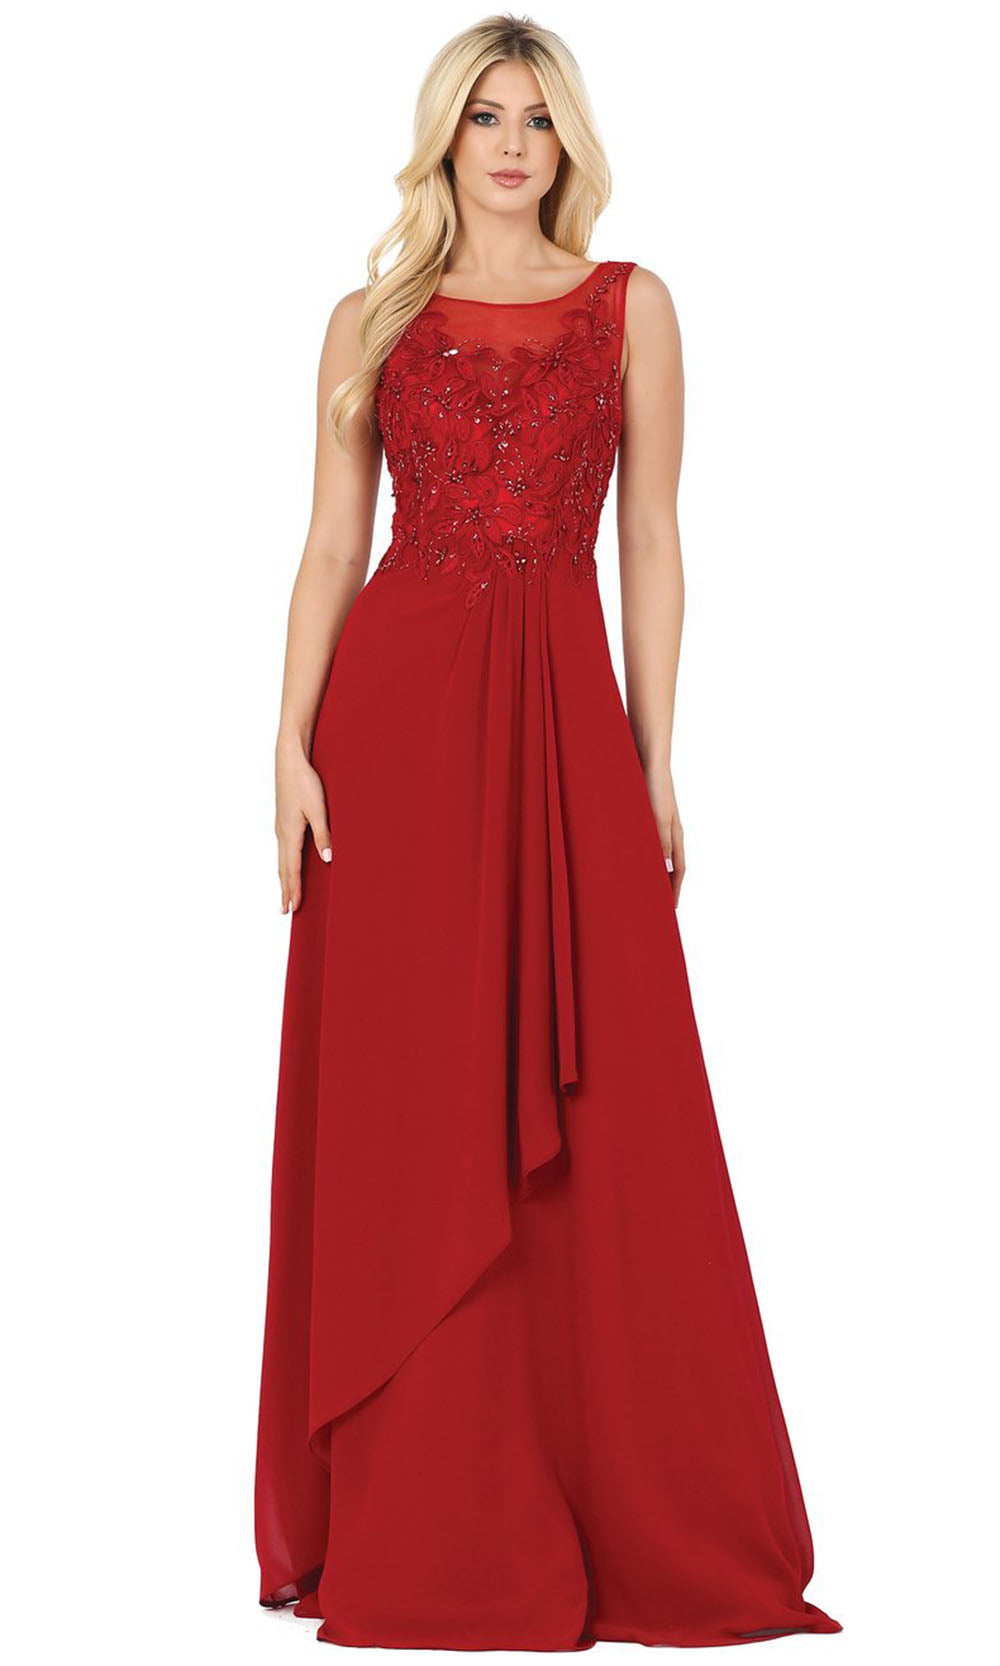 Dancing Queen - 2953 Embellished Bateau A-Line Dress In Red